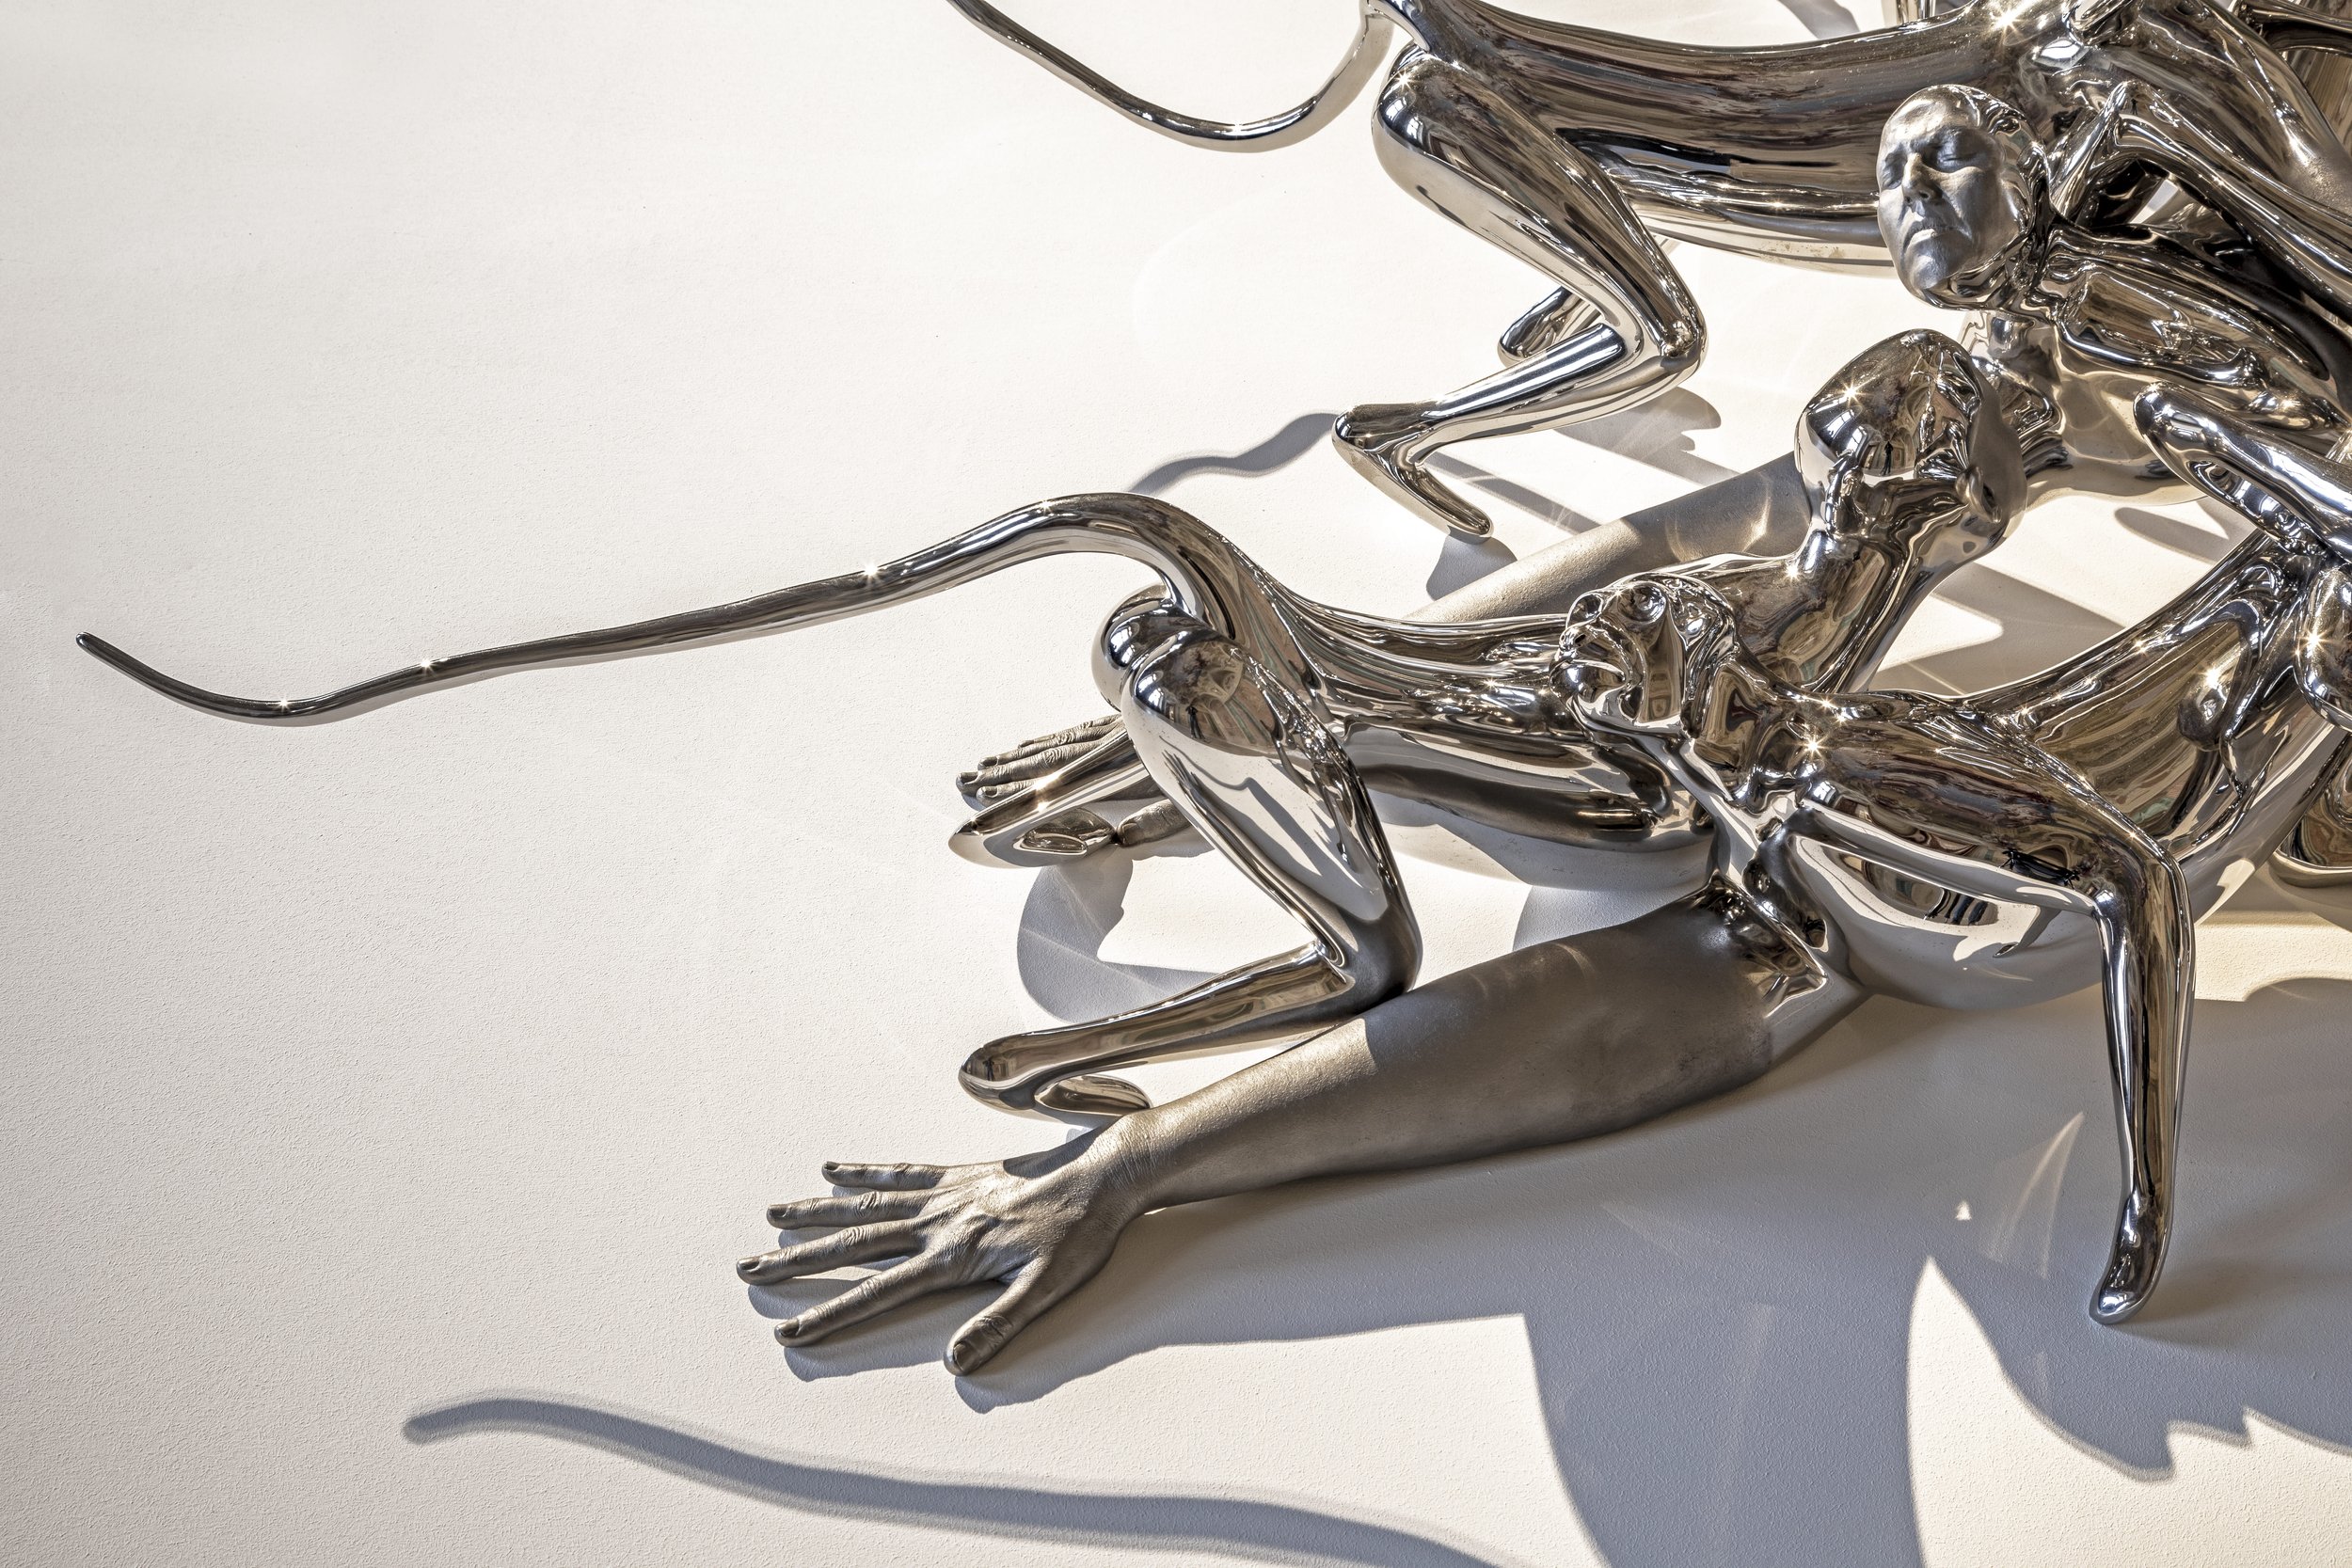  Rona Pondick, detail from  Monkeys,  1998-2001, Stainless steel, Edition of 6 + 1 AP, 41 1/4 x 66 x 85 1/2 in (104.77 x 167.64 x 217.17 cm) 